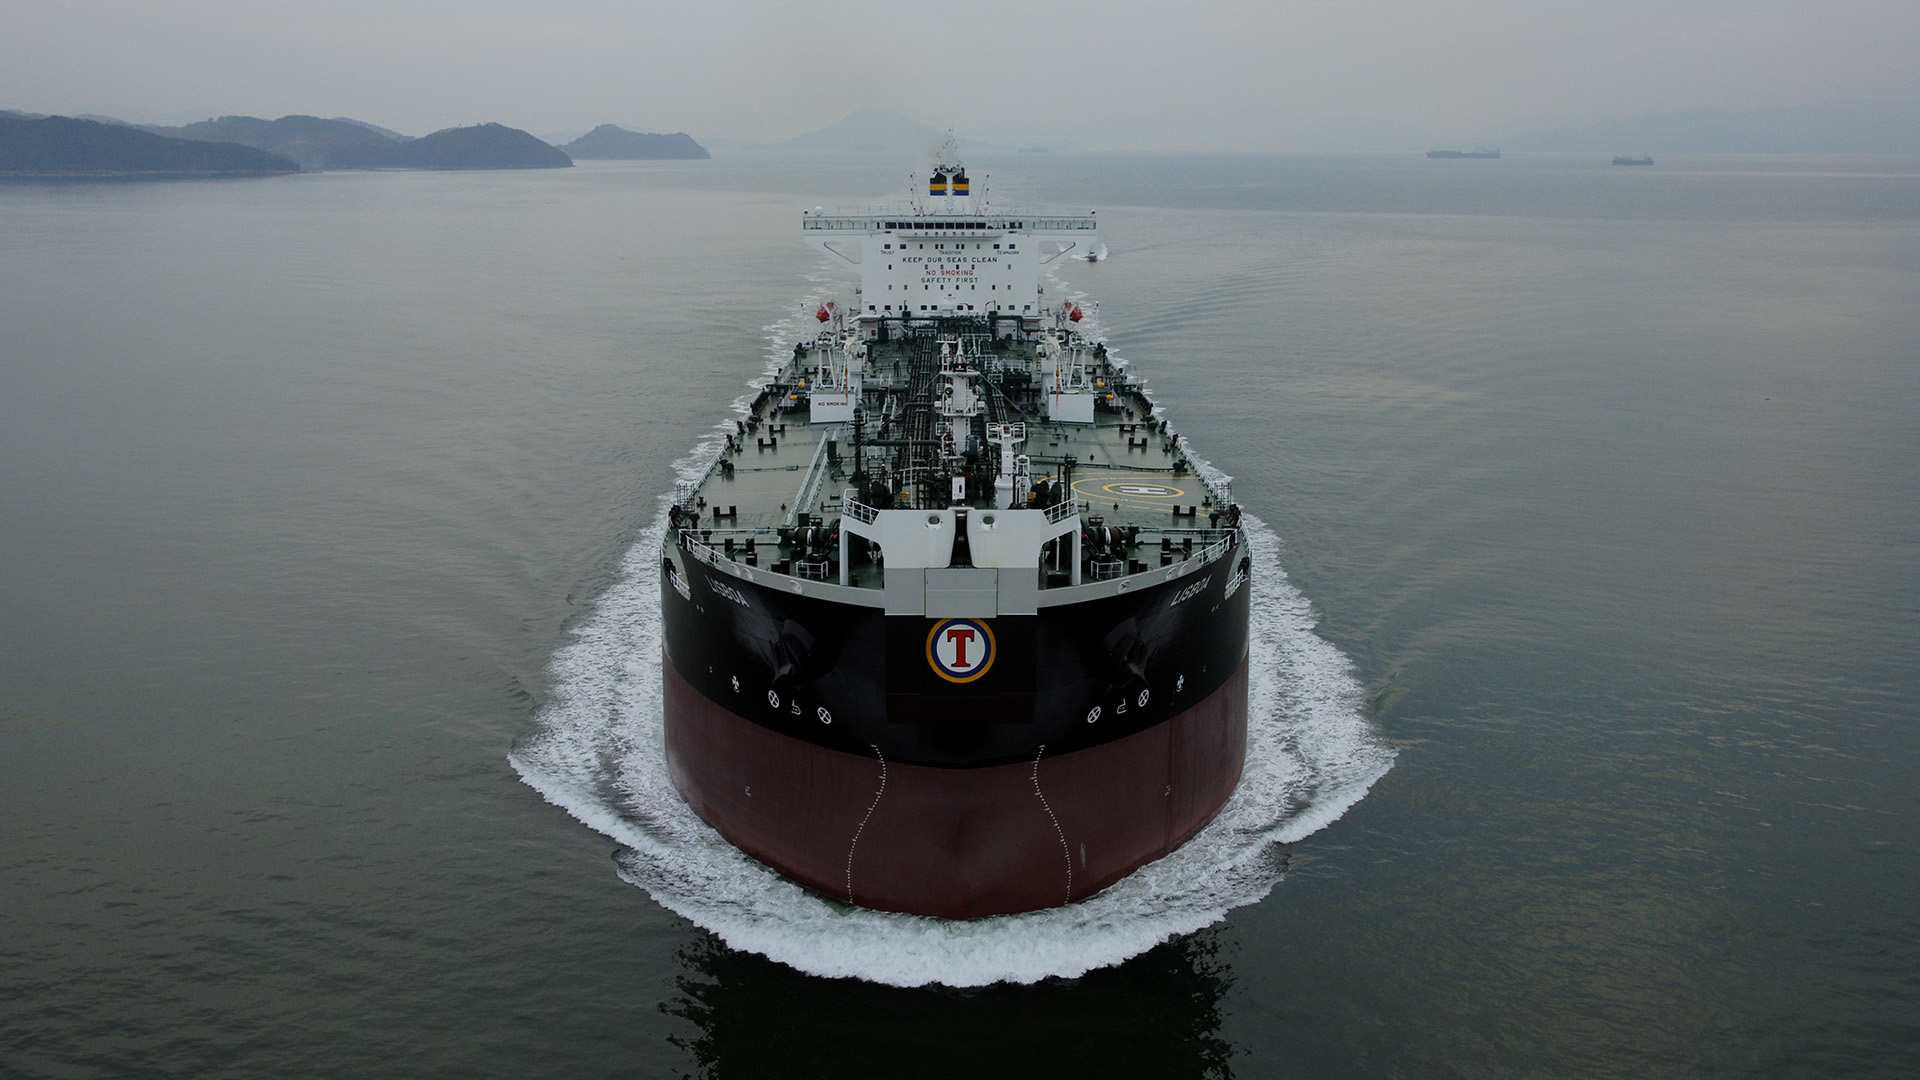 TEN Ltd. Reports Successful Delivery of Four-Vessel Series With Long-Term Employment to Oil Major